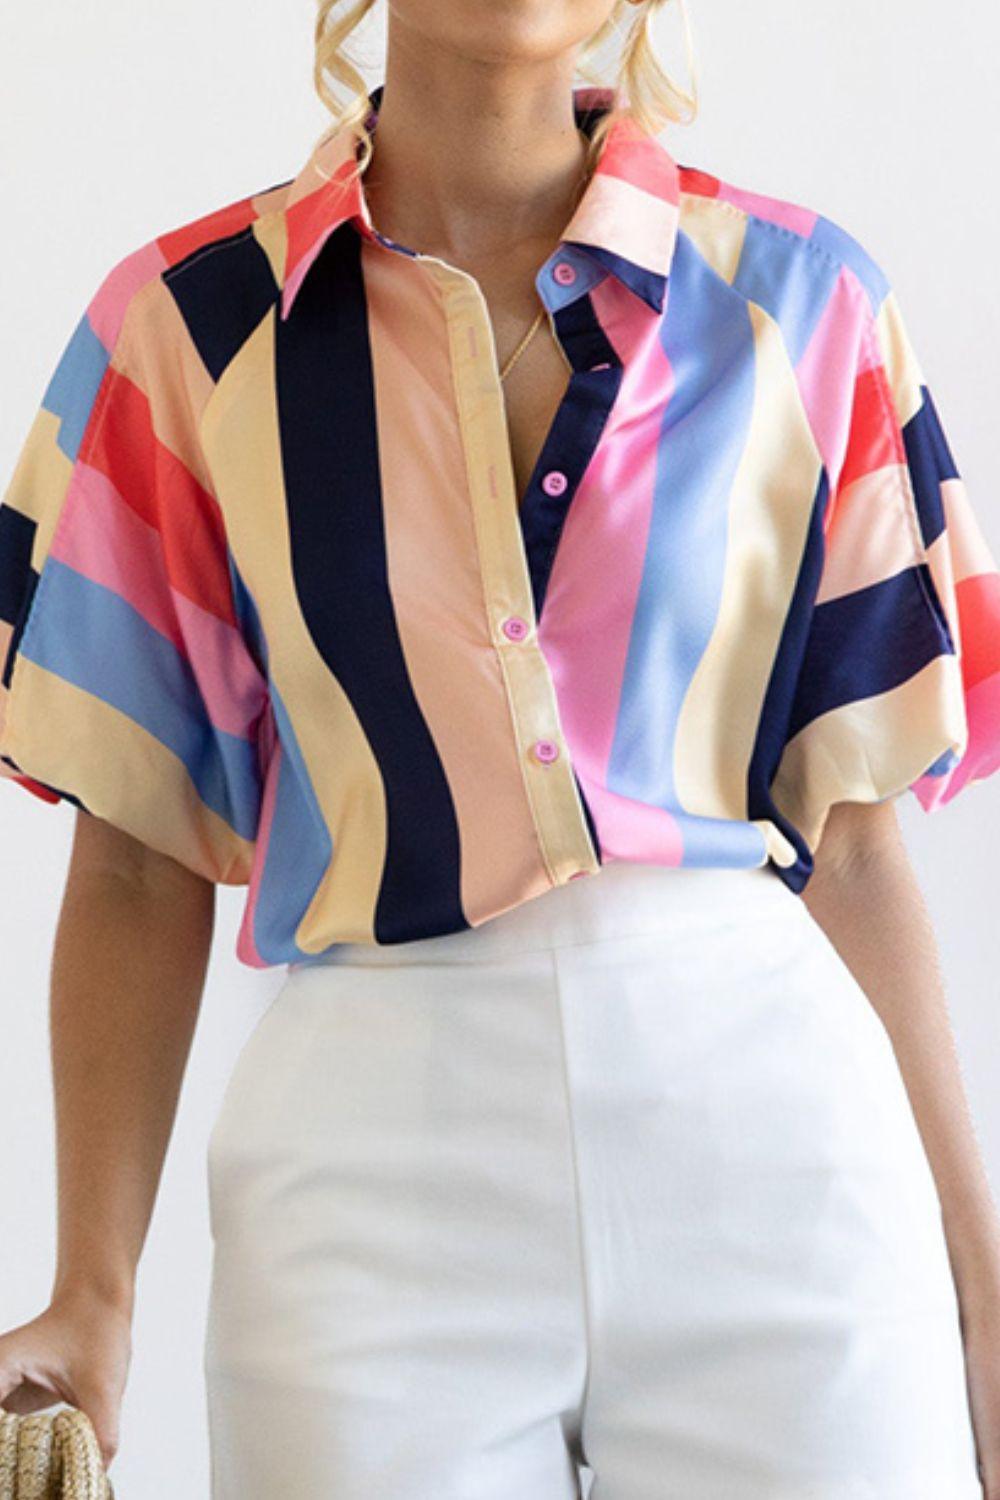 a woman wearing a colorful shirt and white pants